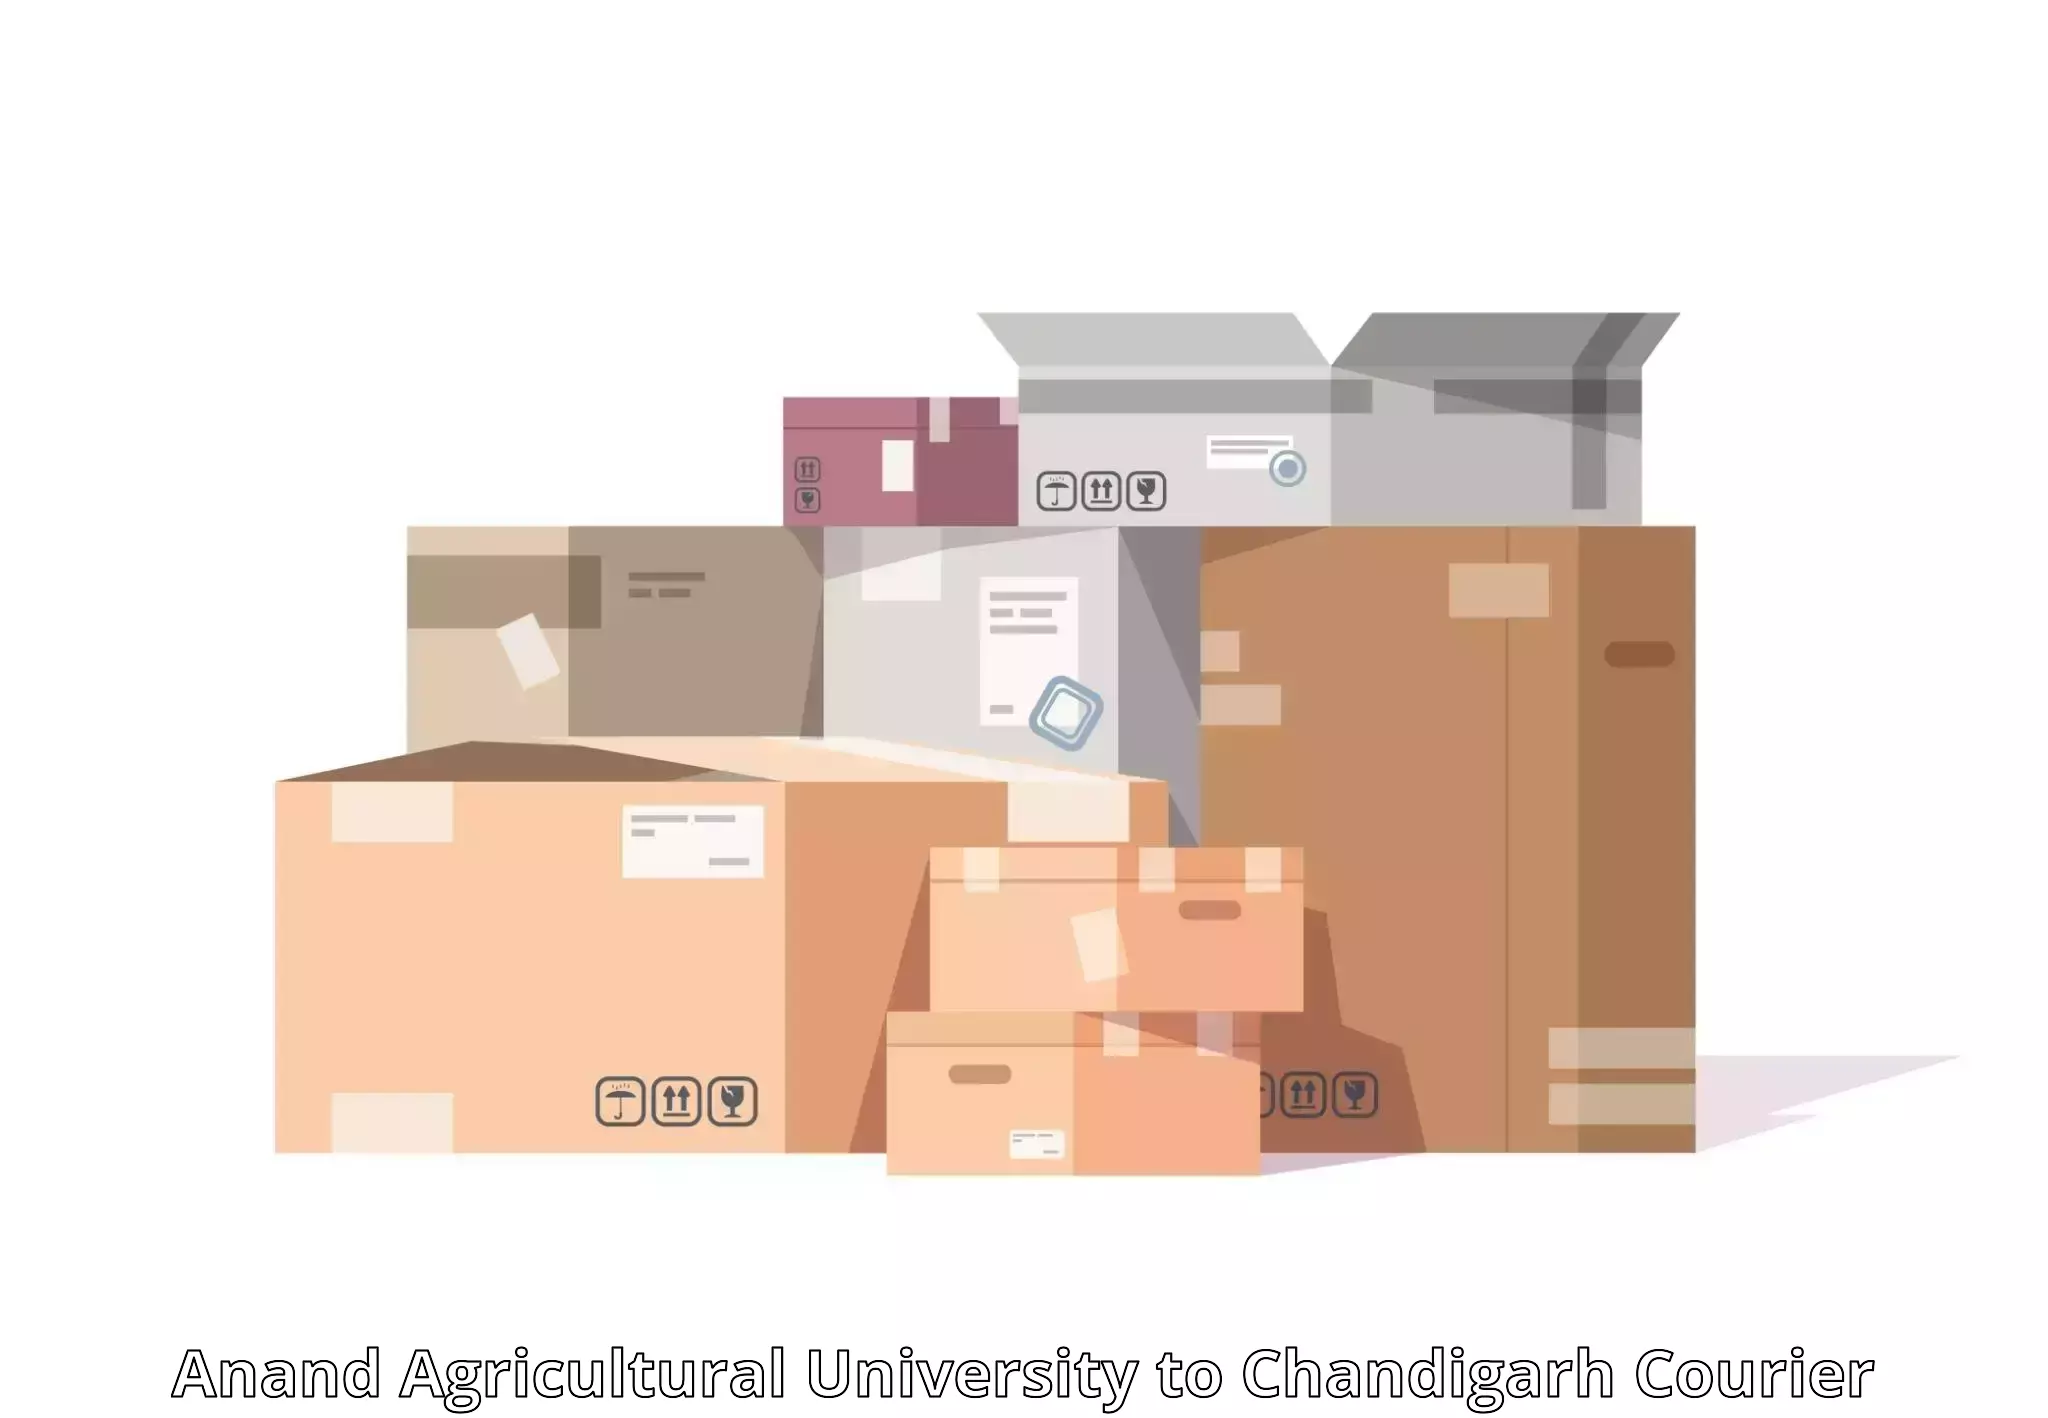 Online shipping calculator Anand Agricultural University to Chandigarh